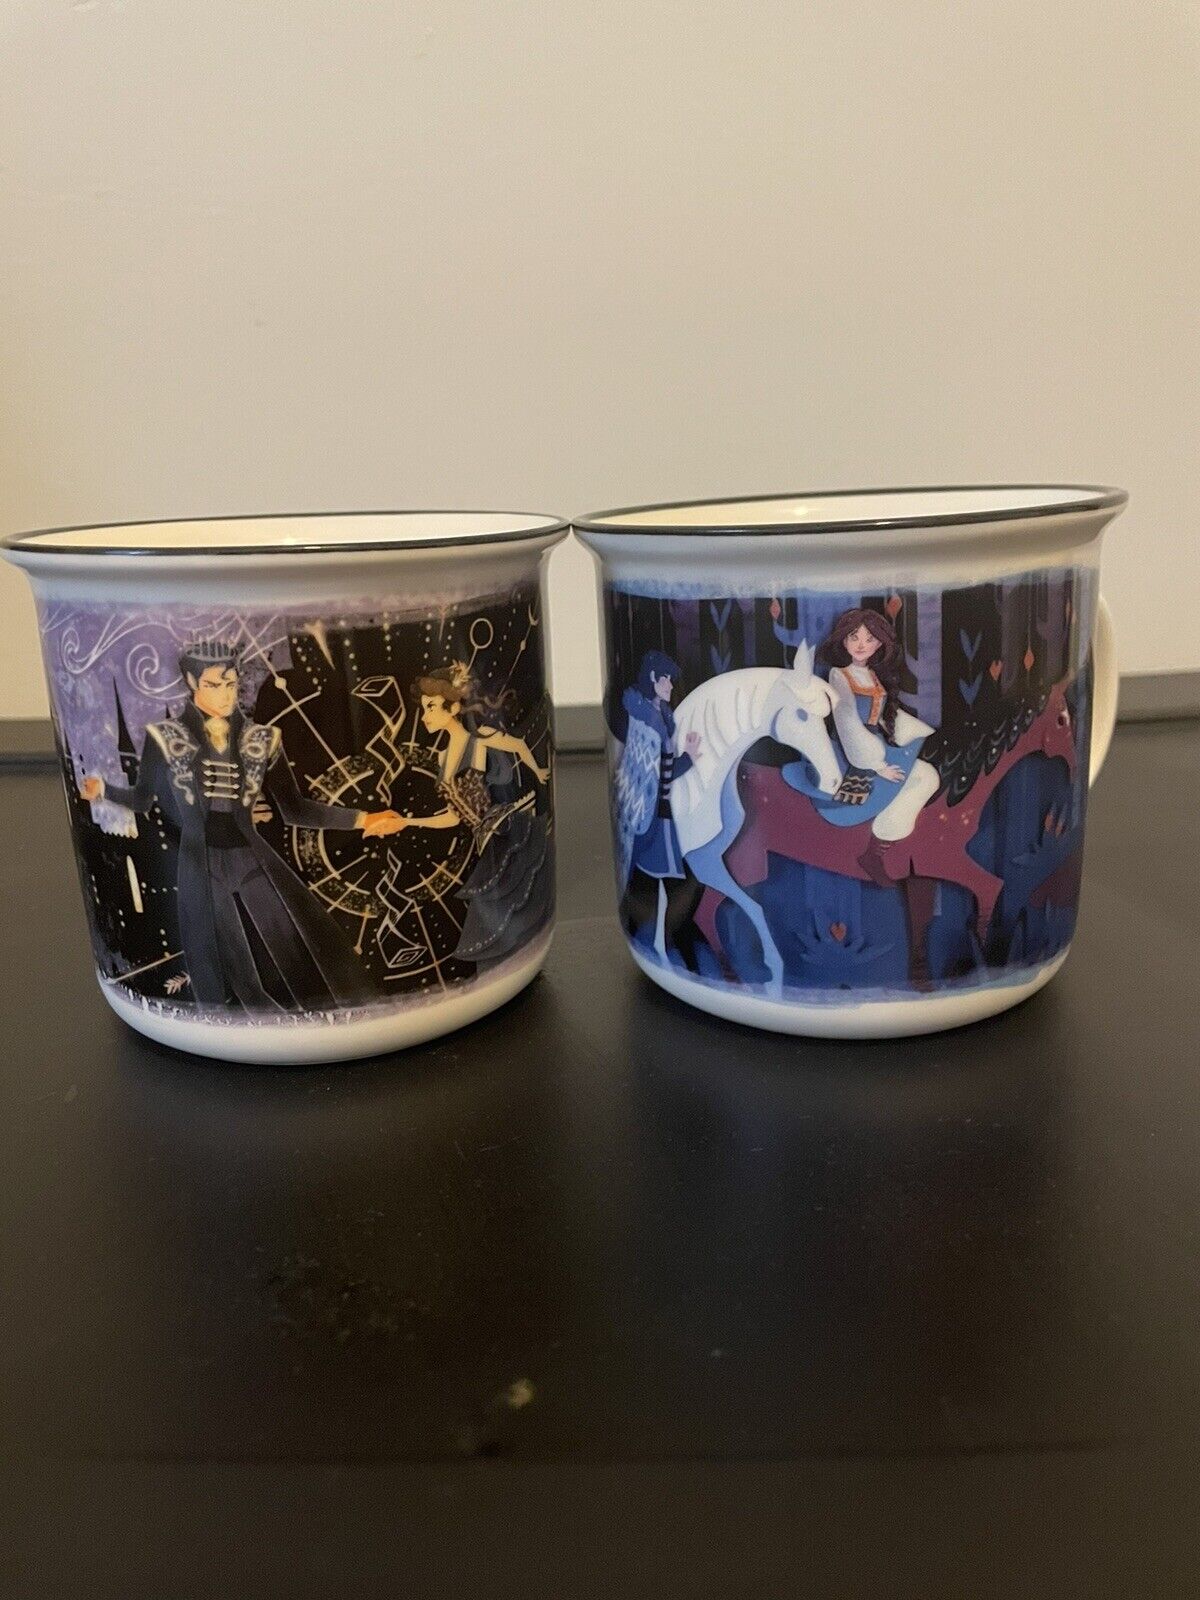 2 Illumicrate Exclusive Mugs - Kingdom Of The Wicked & The Road Through midnight